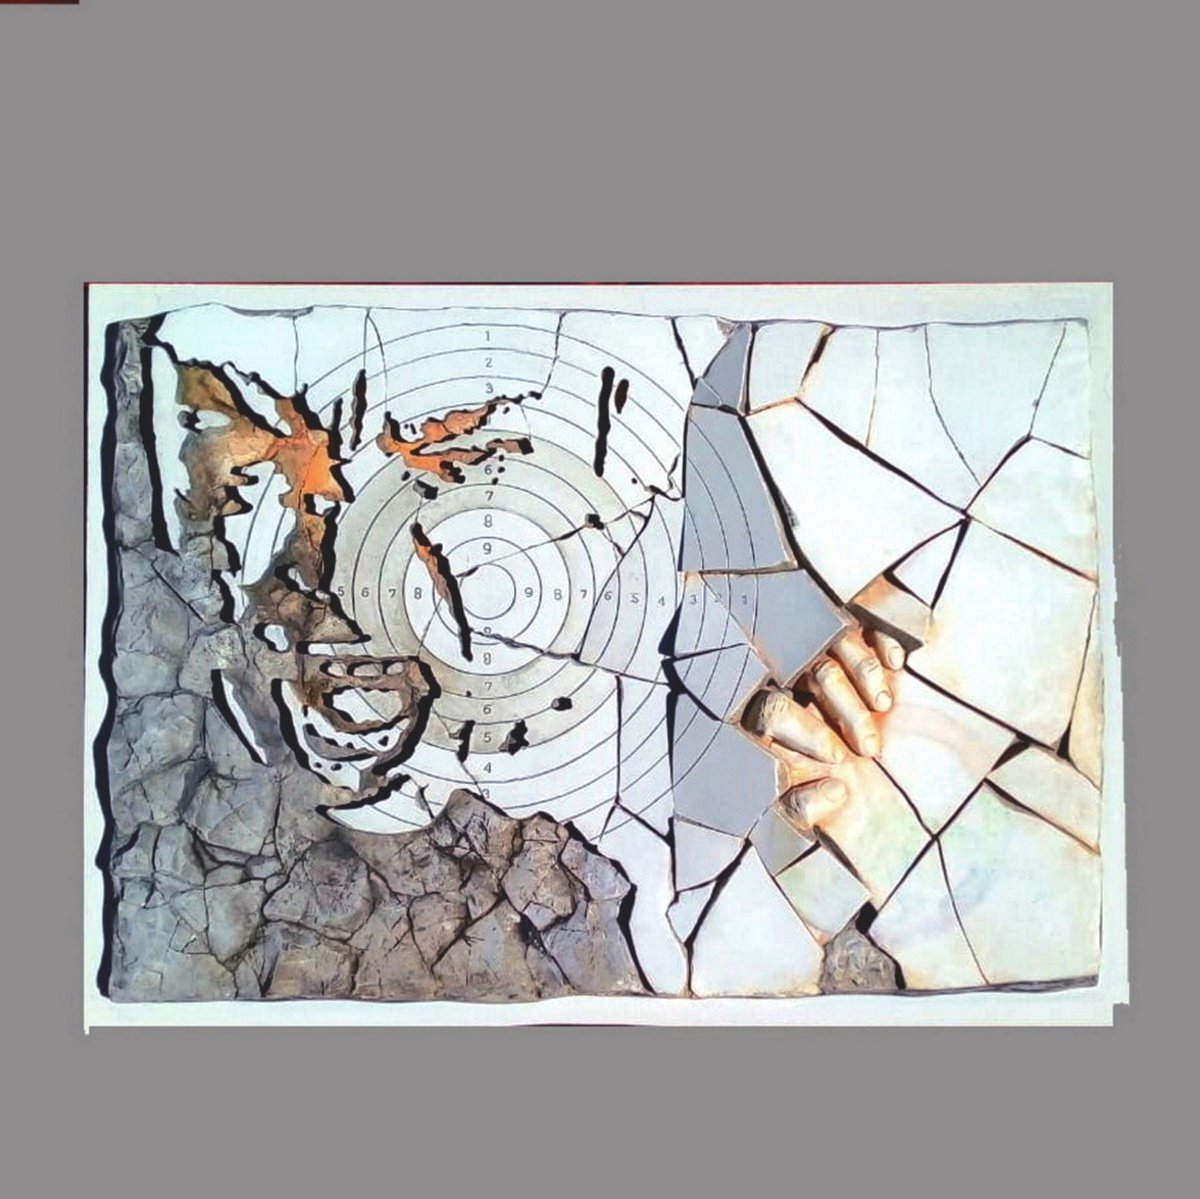 Bas-relief sculpture IN THE VIEWFINDER 4/9 Italy Size: 31 W x 22 H x 2.7 D in 57x79x6... by Elena Karamushka Artist